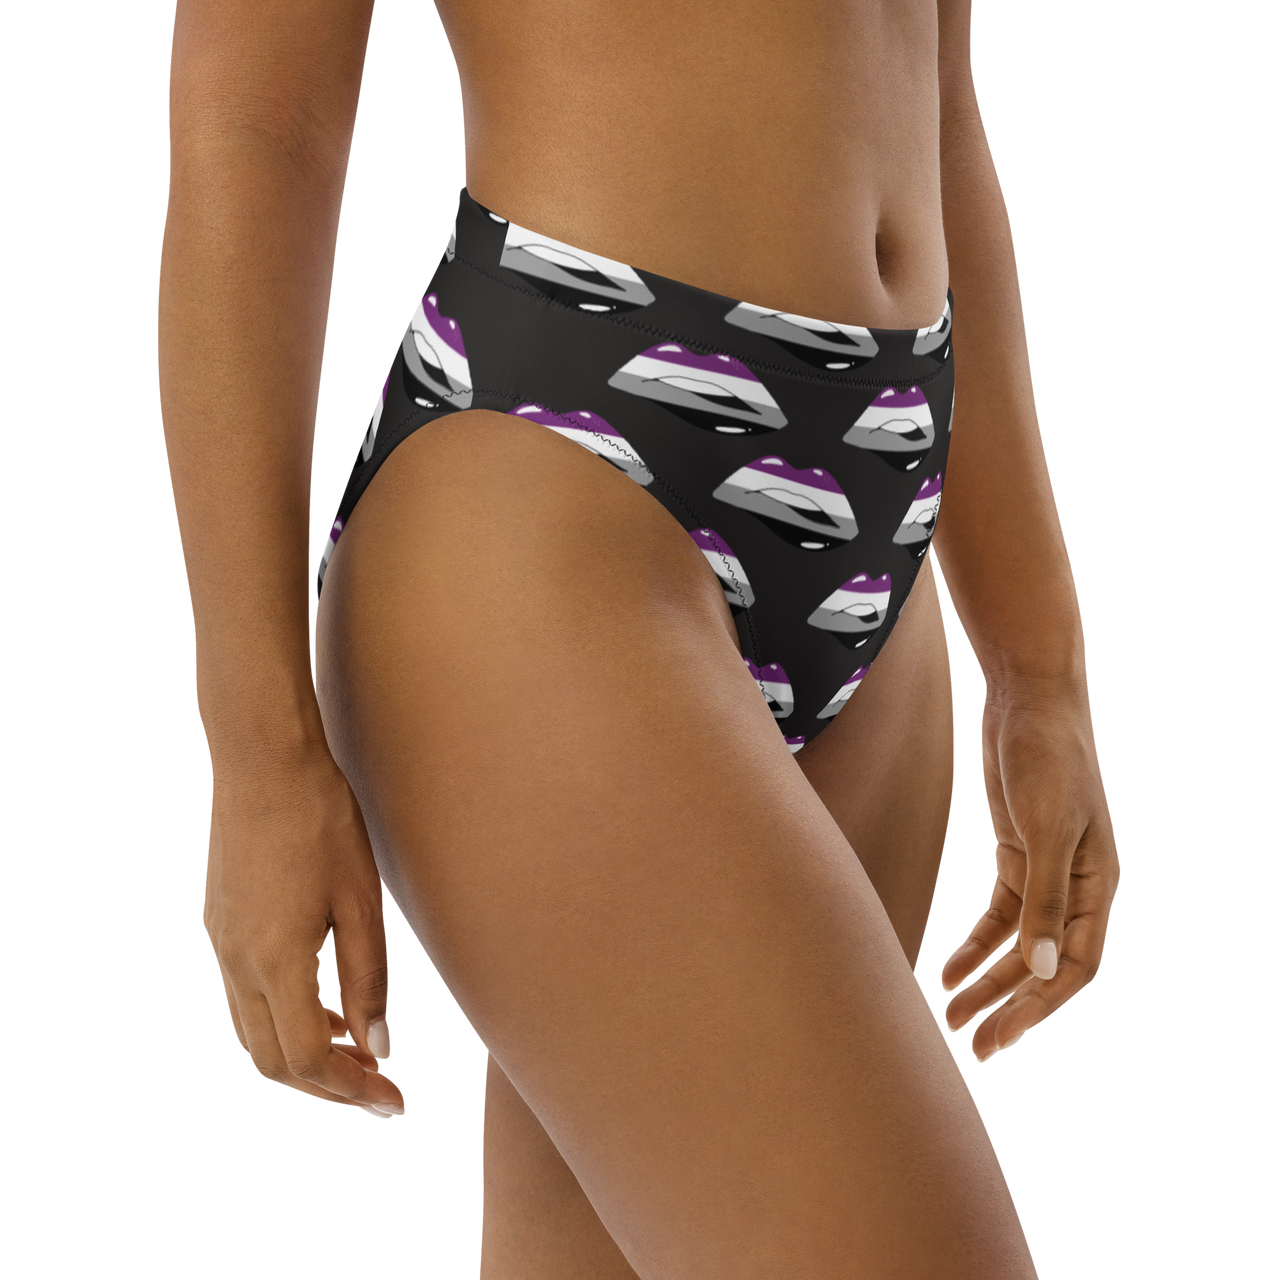 Asexual Flag LGBTQ Kisses Underwear for They/Them Him/Her - Black SHAVA